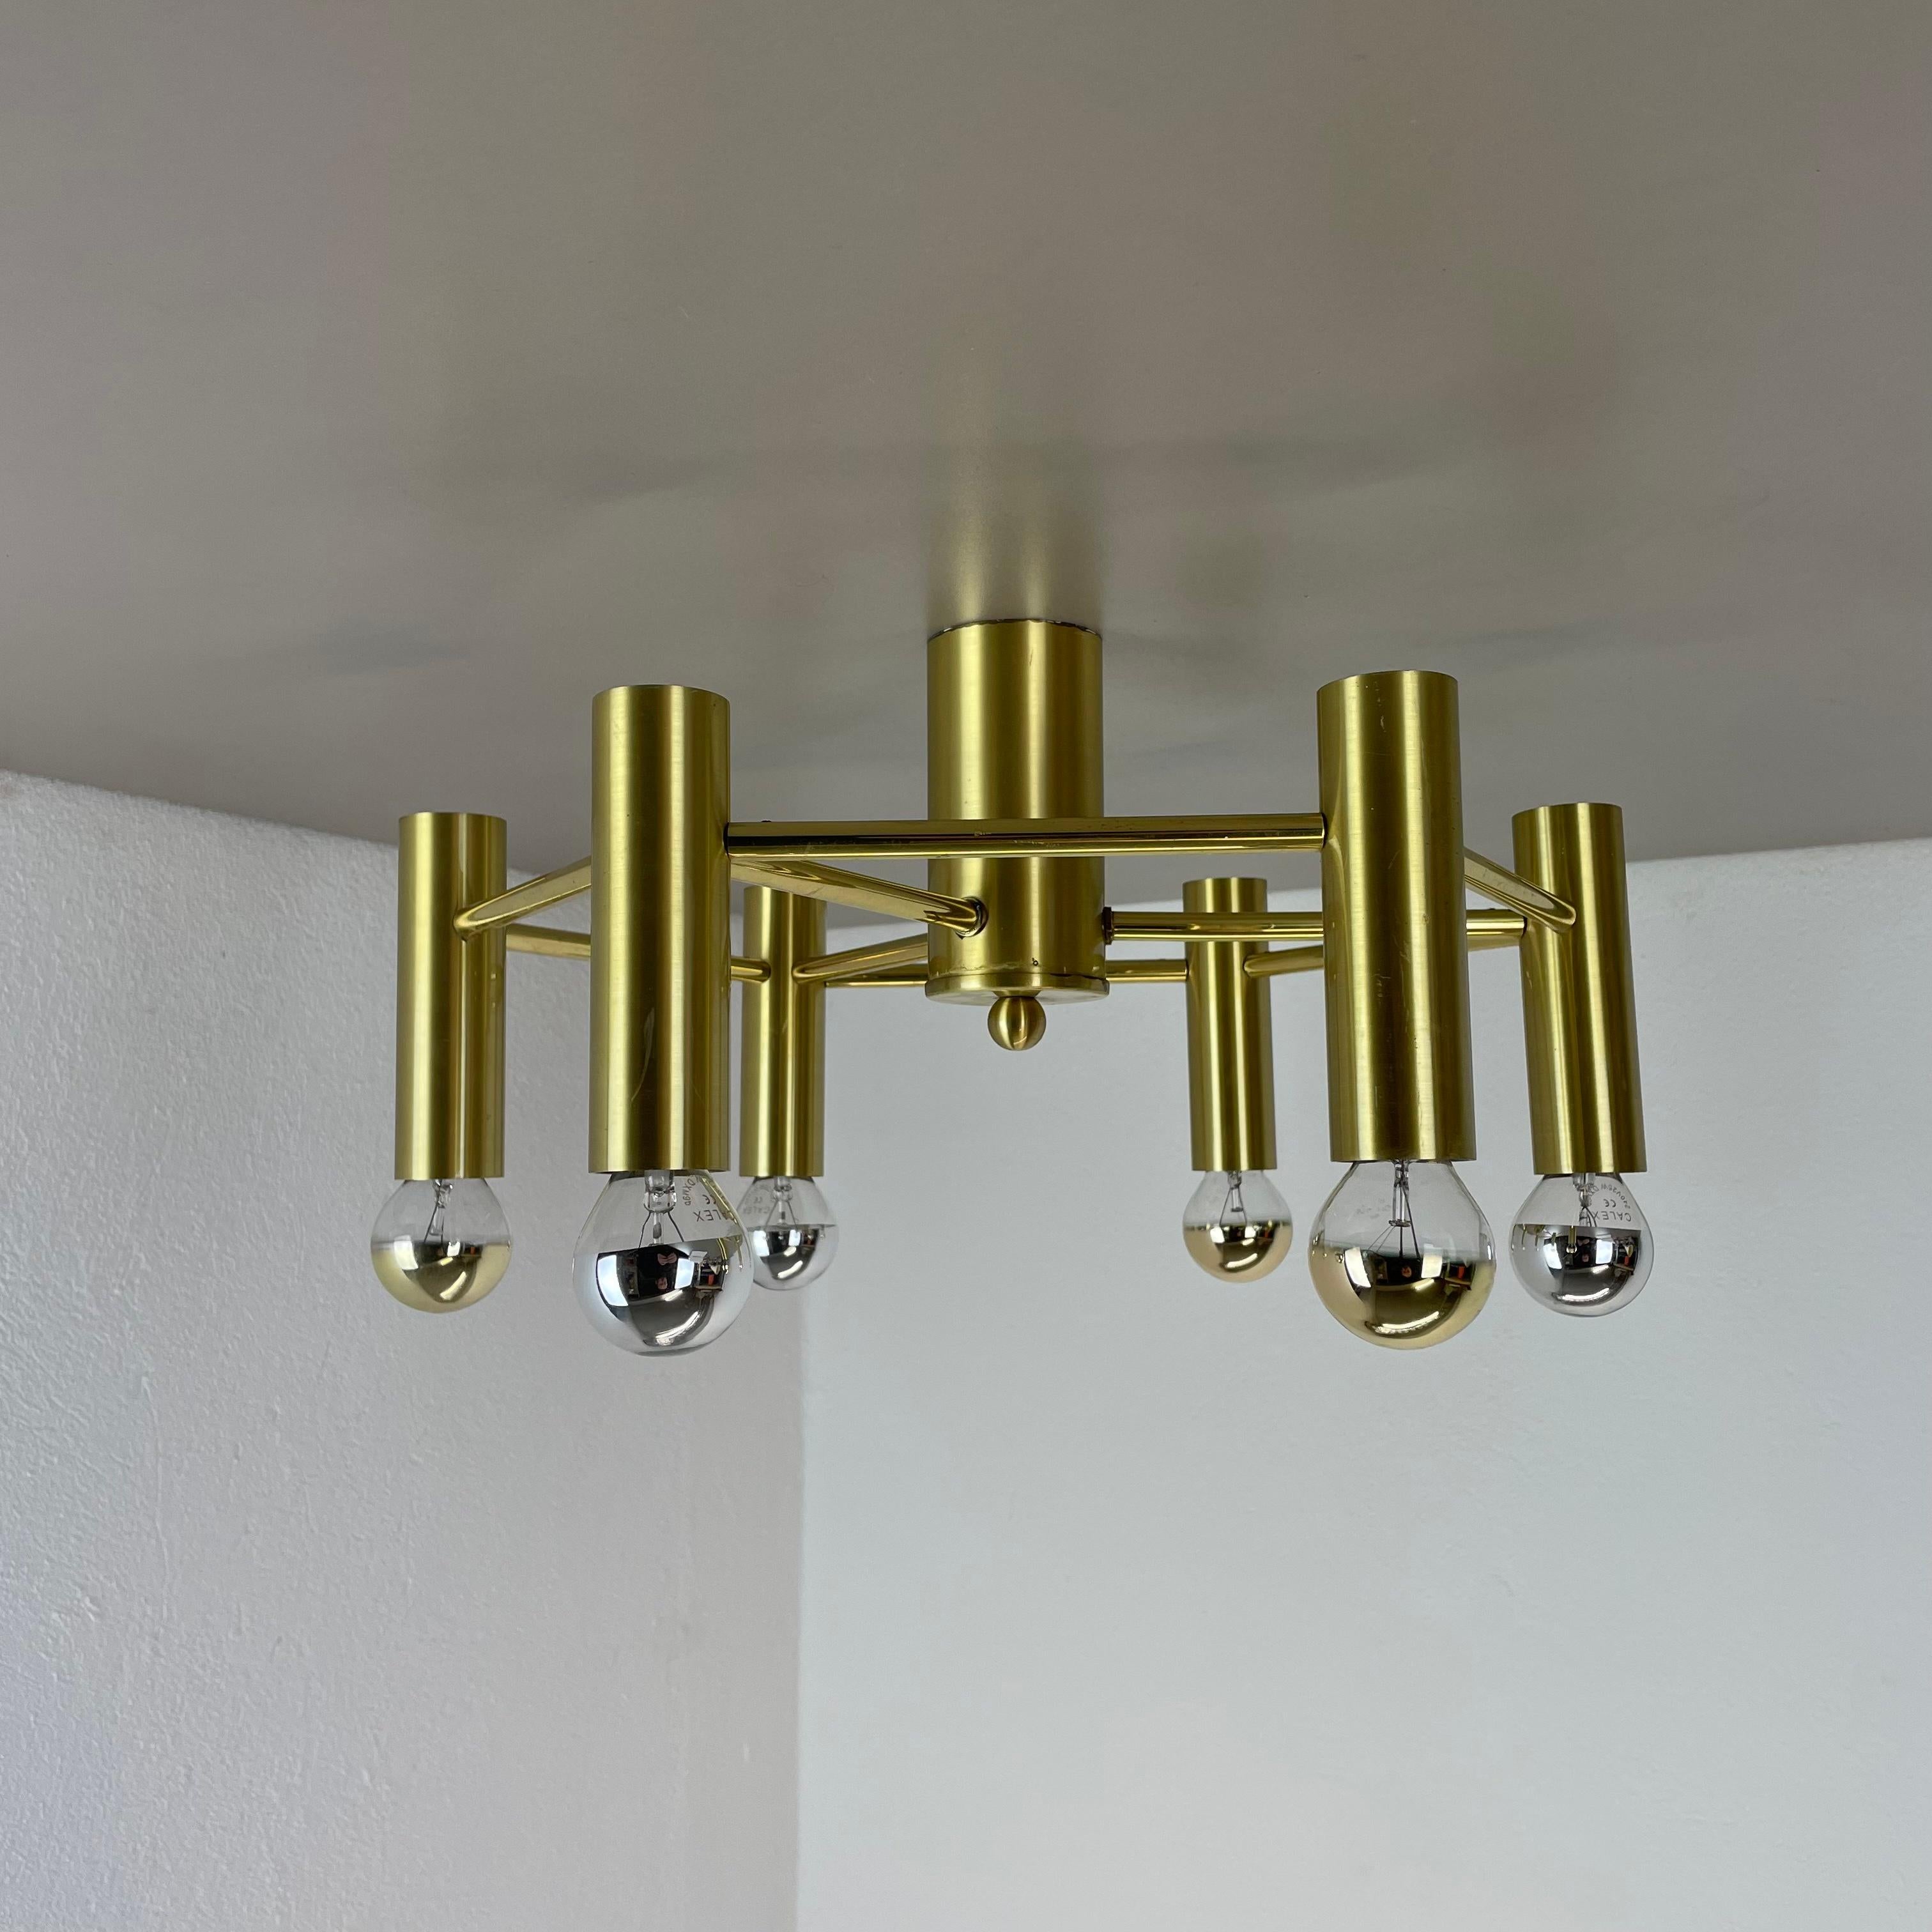 Mid-Century Modern Brass Italian Stilnovo Style Atomic Space Age Ceiling Light Sconces, Italy, 1970 For Sale